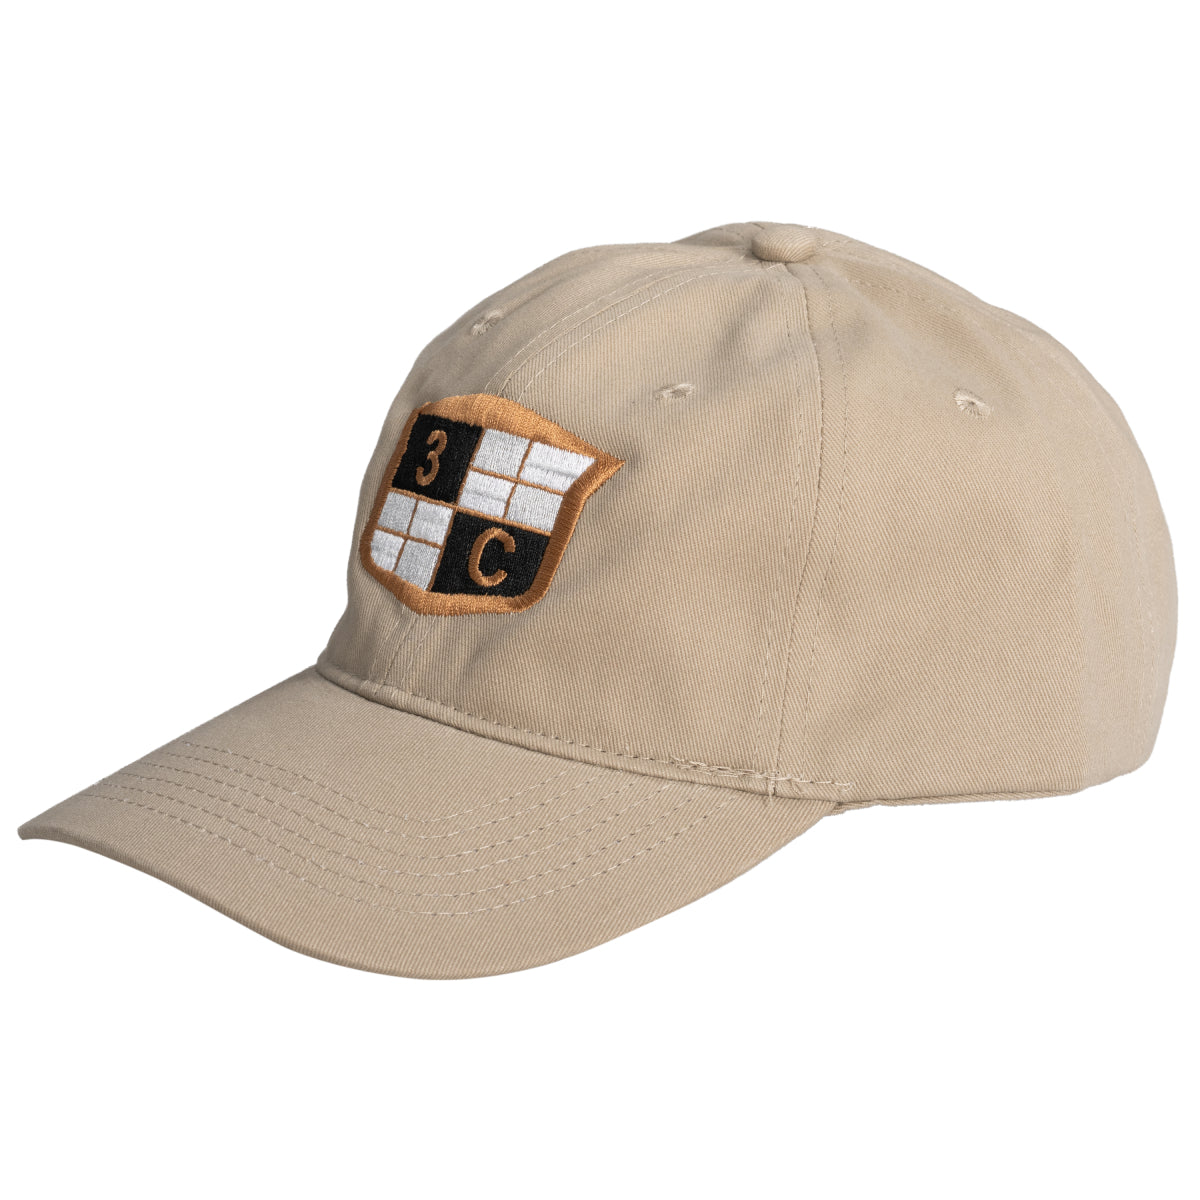 Seal Team 3 and Chris Kyle Hats Authentic Headgear for Sniper Movie Enthusiasts